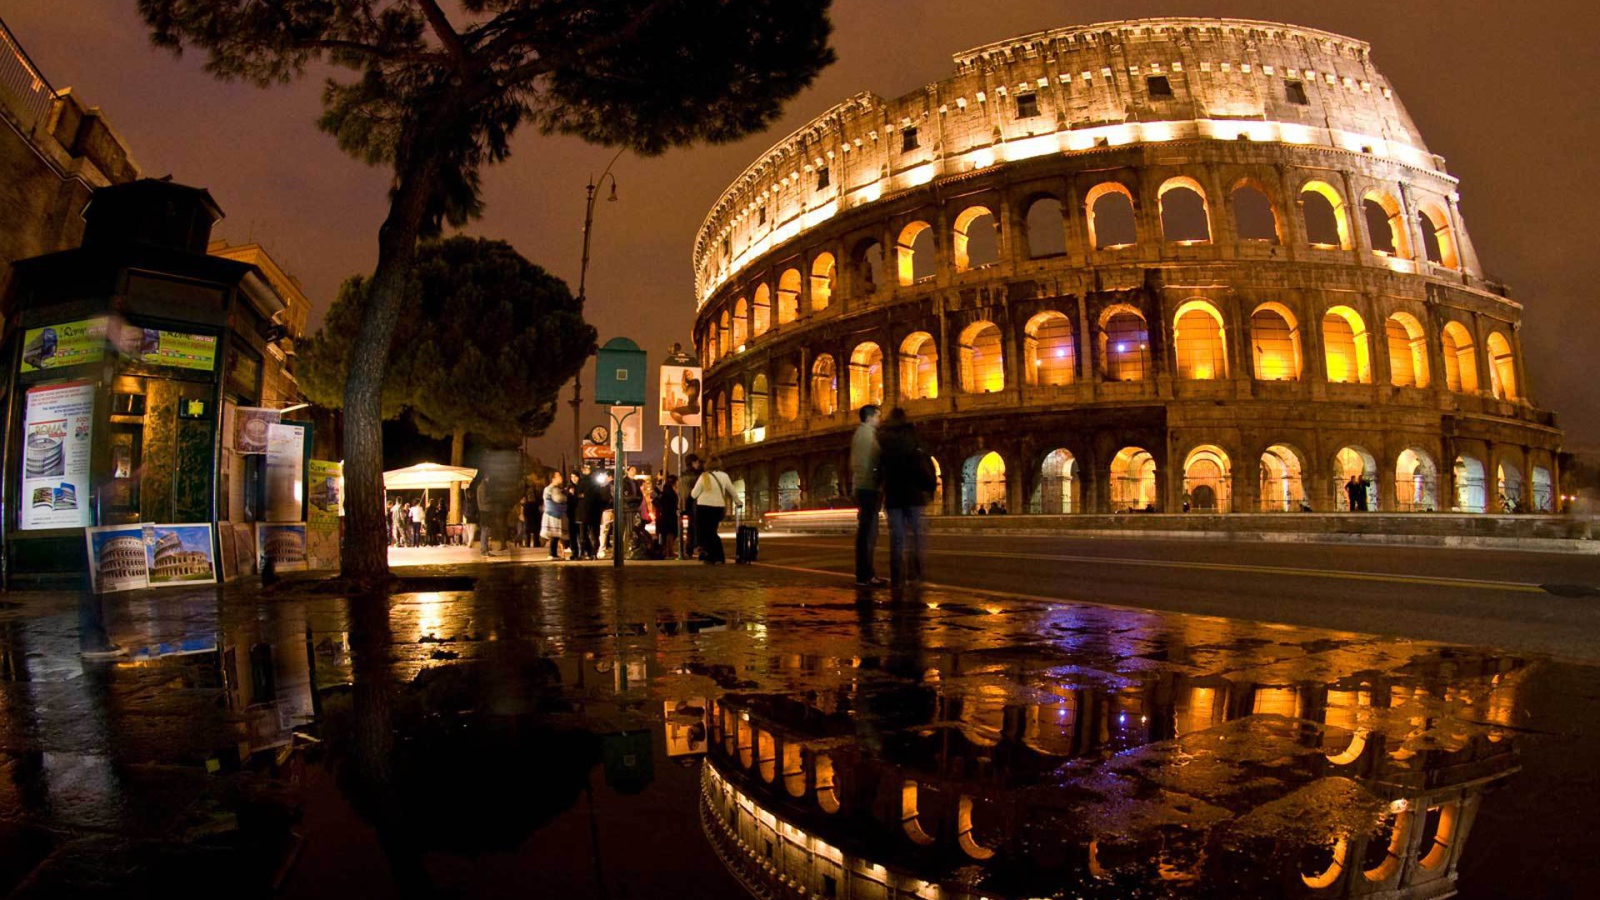 Walk after the rain in Rome, Italy